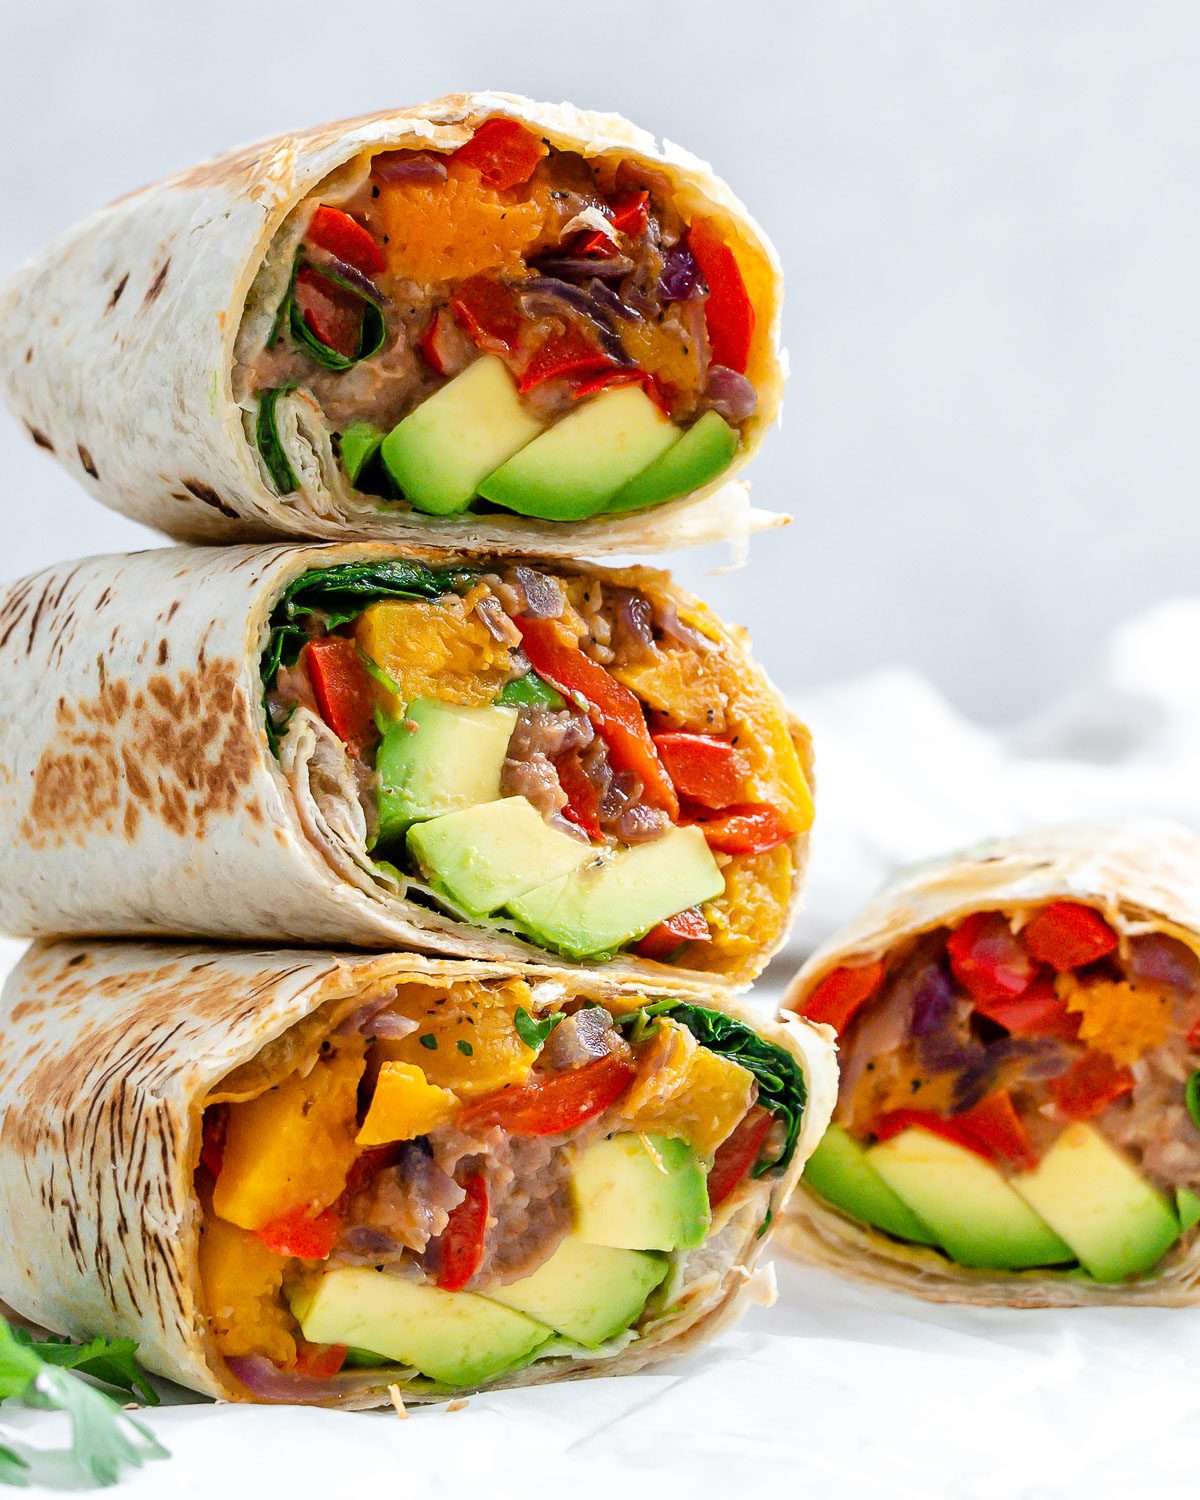 four completed Butternut Squash Burritos stacked on one another against a light background